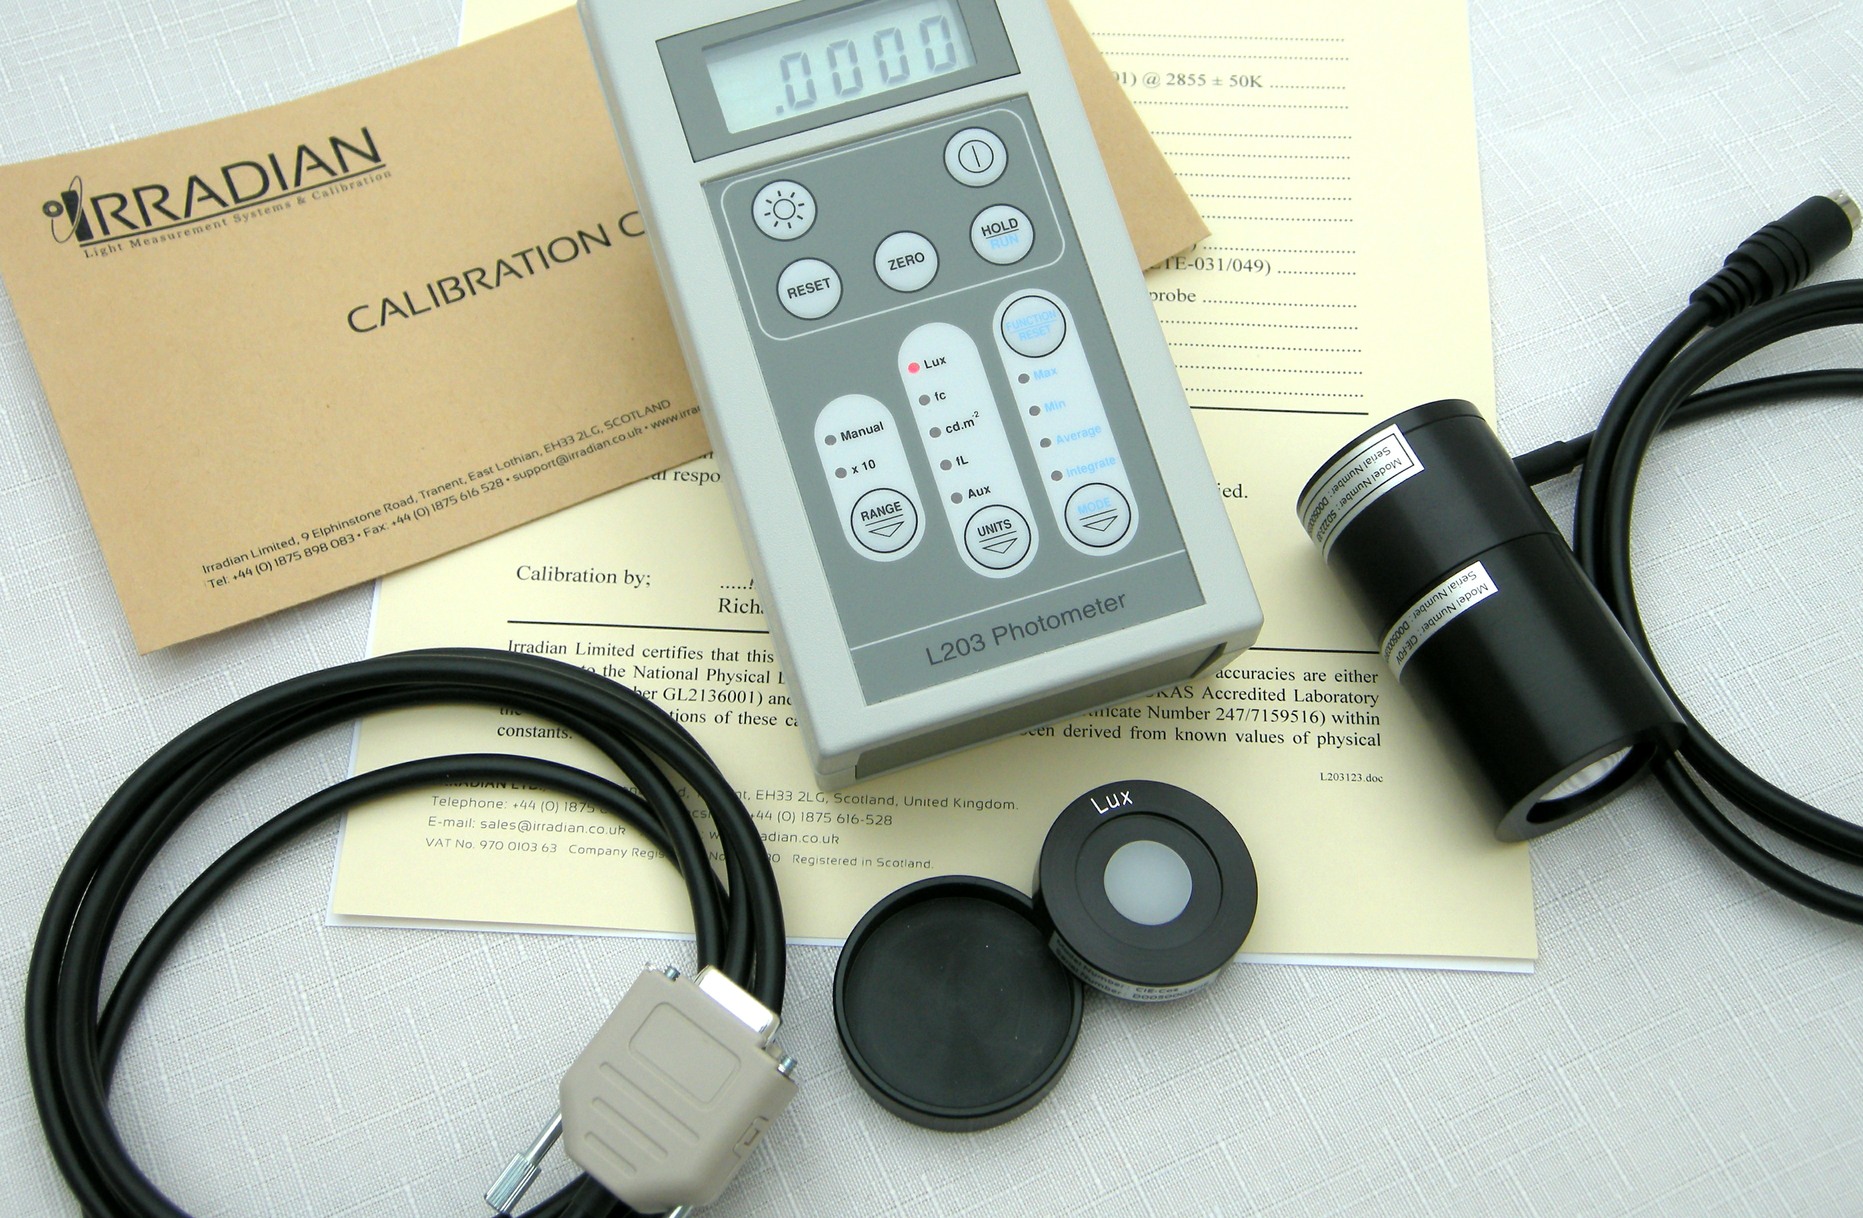 Calibrated visible light meter and accessories